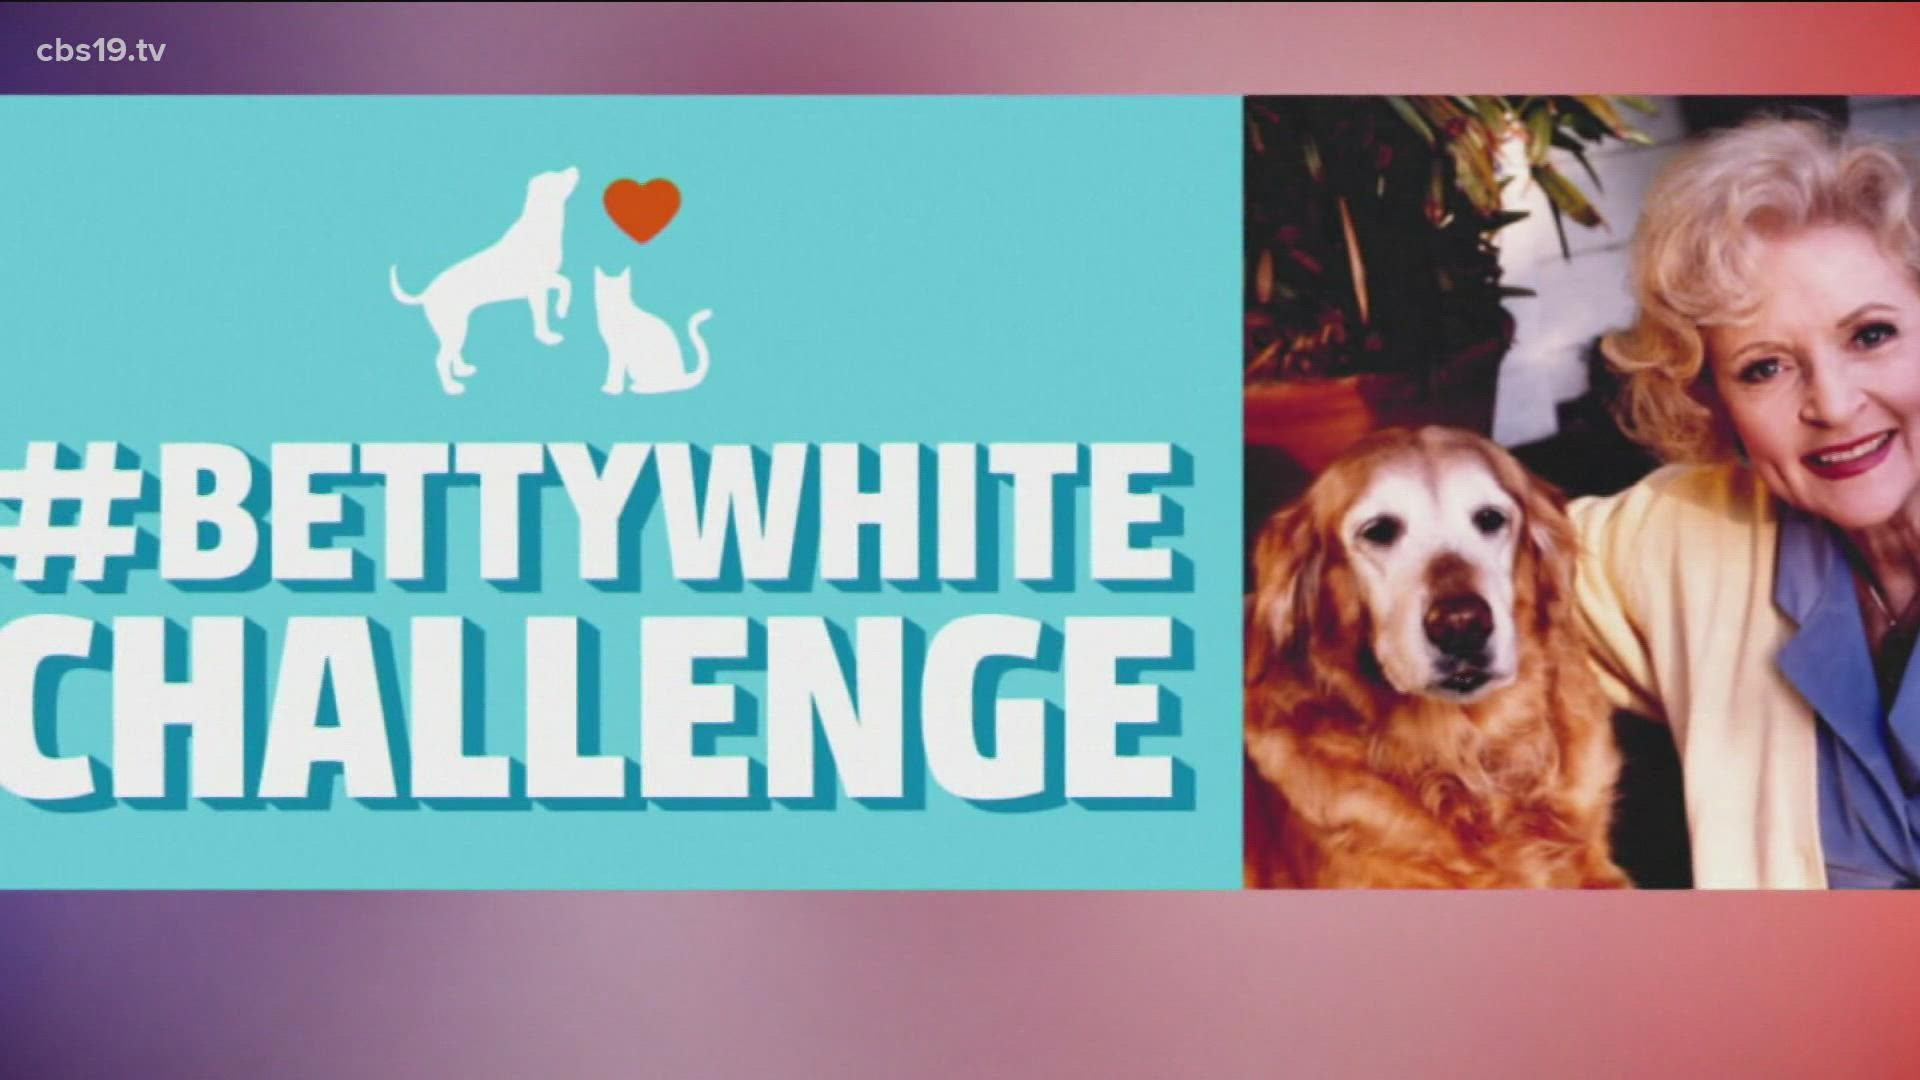 The Betty White Challenge is a social media trend that encourages people to donate at least $5 to local animal shelters in memory of the celebrity